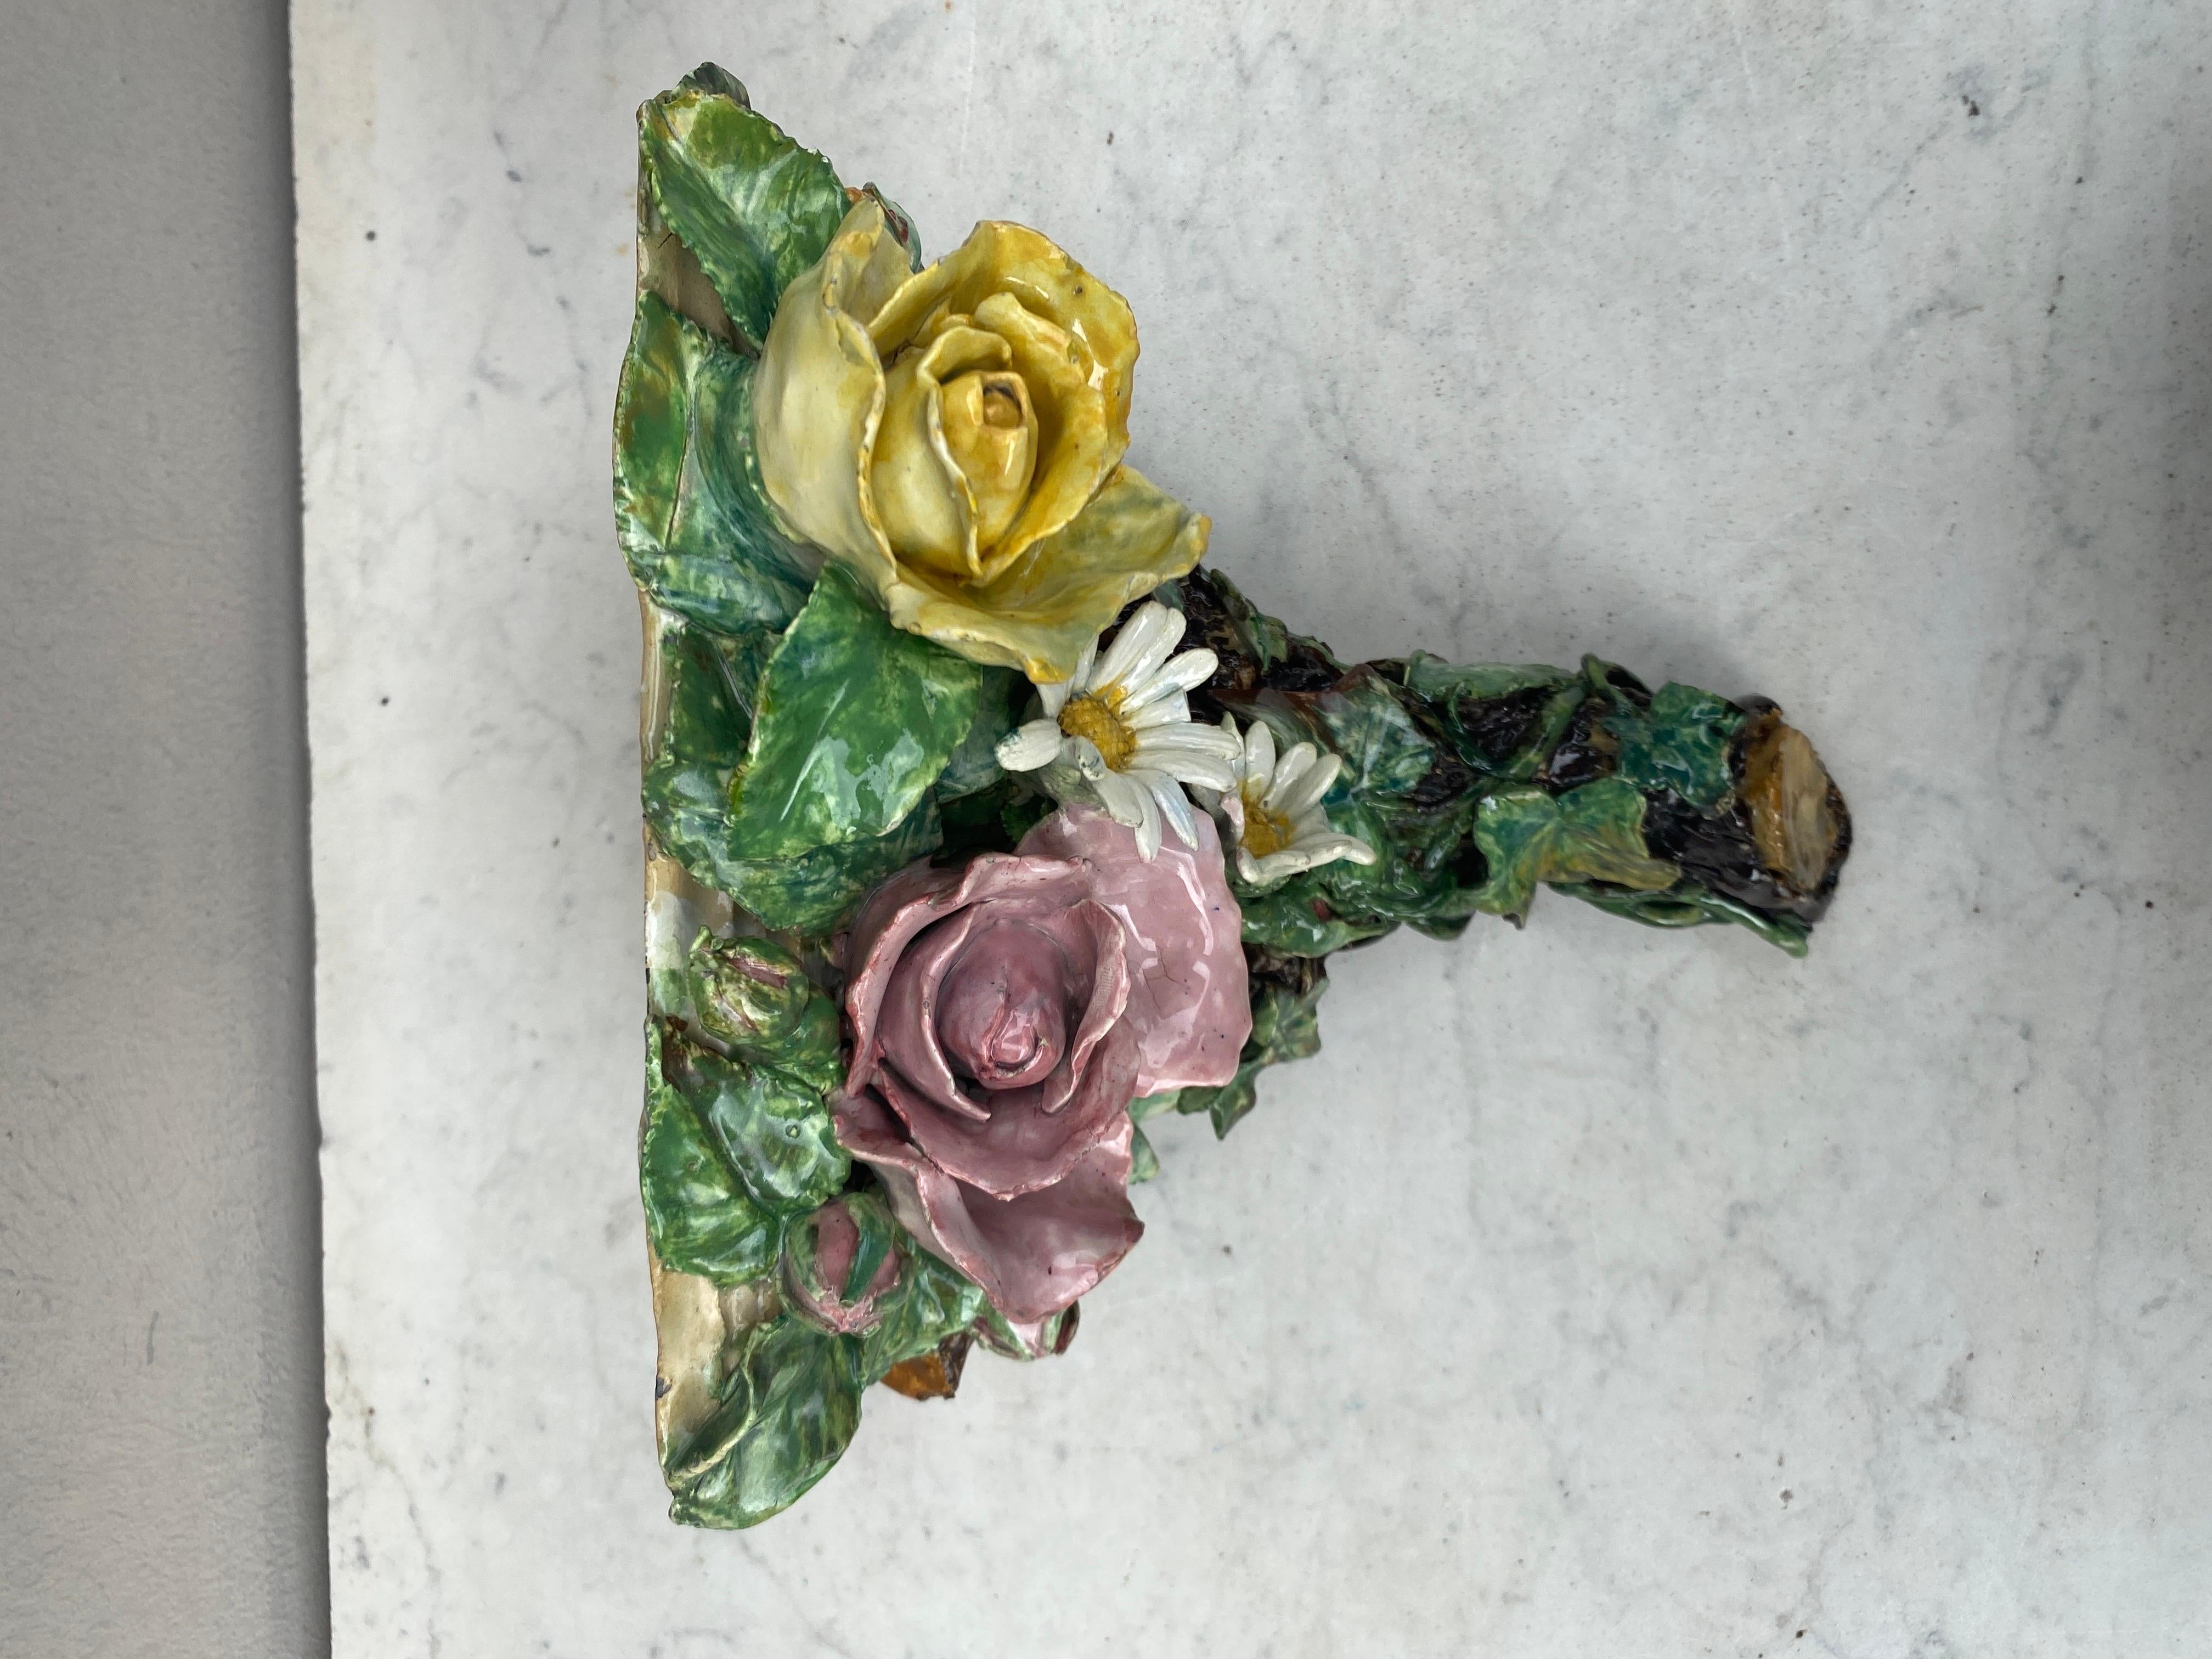 Unusual 19th Century French Majolica Sconce with Roses and Daisies For Sale 3